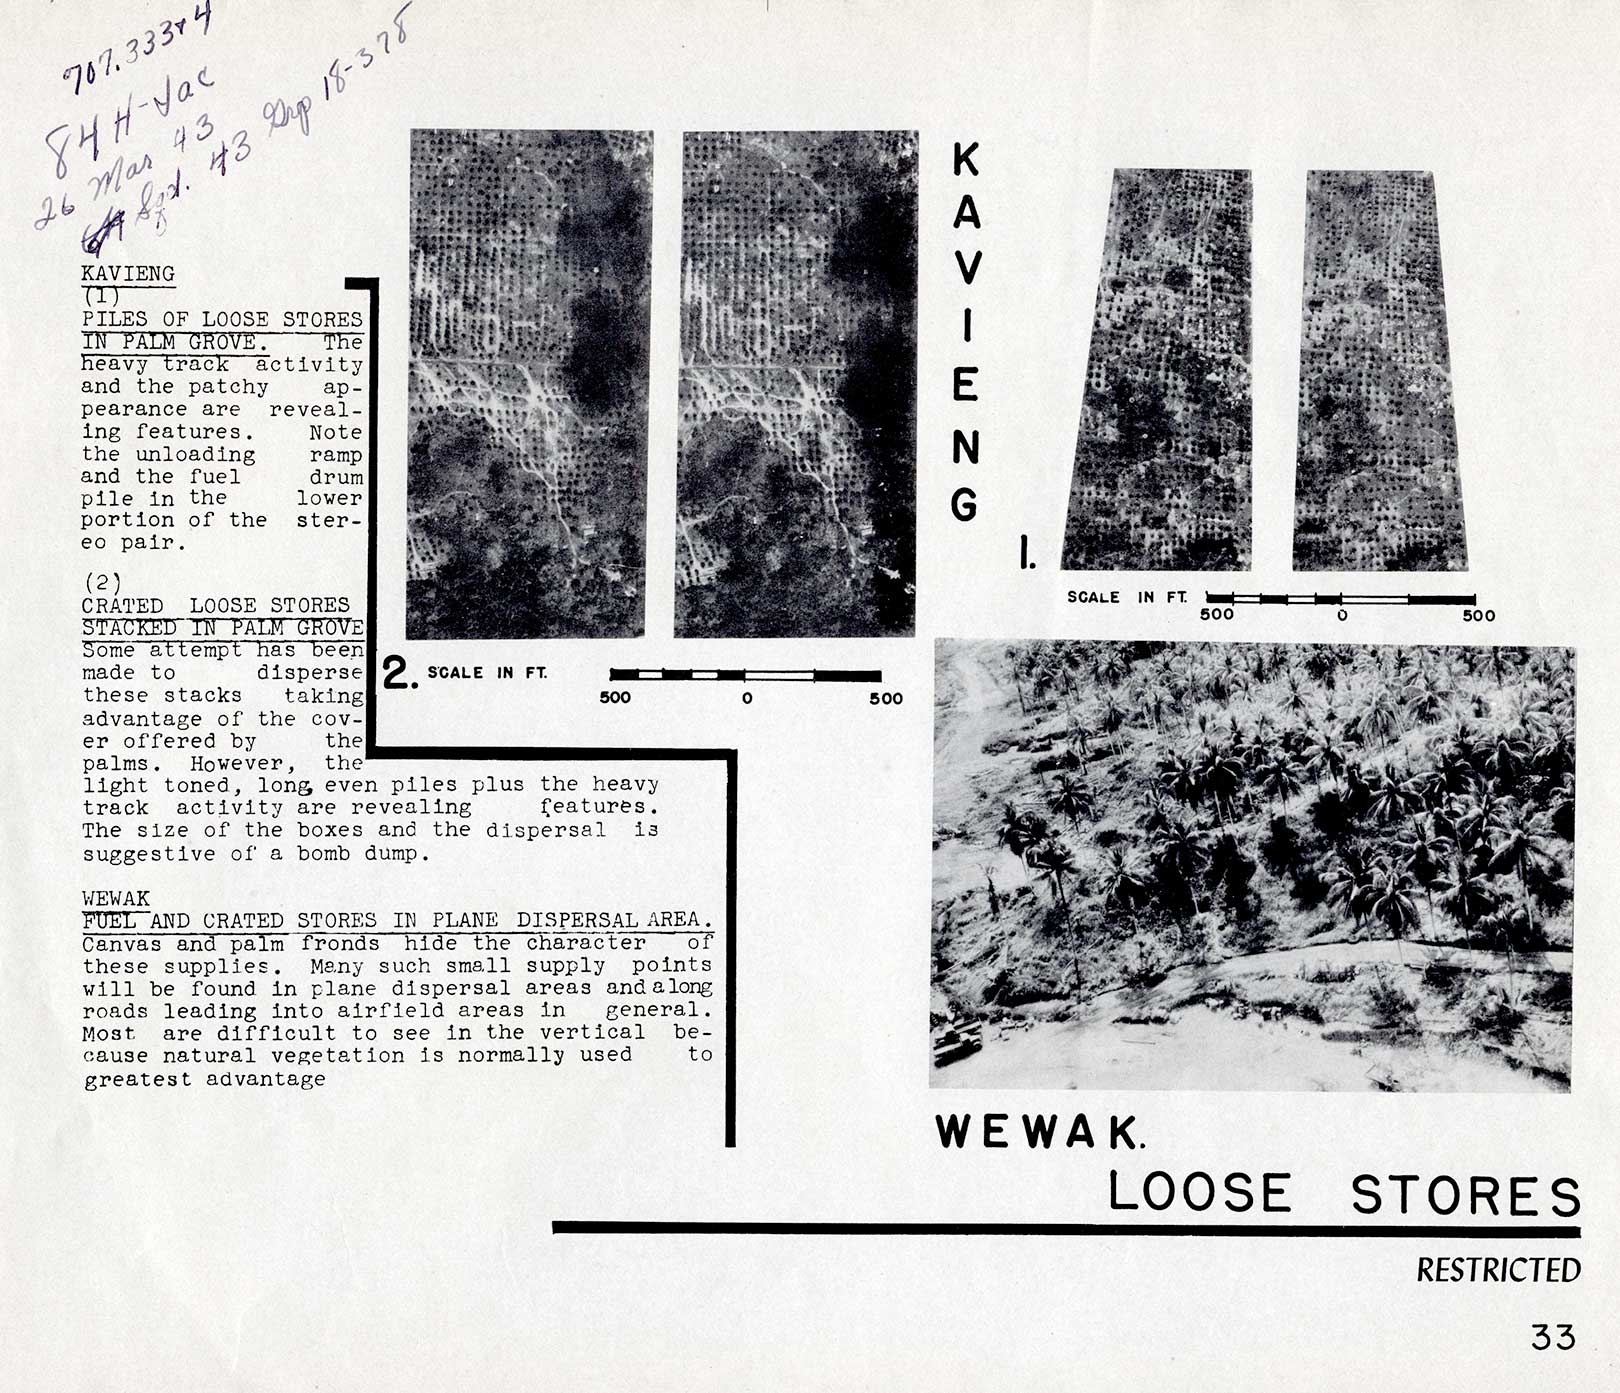 LOOSE STORES
KAVIENG 
(1)  PILES OF LOOSE STORES  IN PALM GROVE. The heavy track activity and the patchy appearance are revealing features. Note the unloading ramp and the fuel drum pile in the lower portion of the stereo pair.

(2)  CRATED LOOSE STORES  STACKED IN PALM GROVE  Some attempt has been made to disperse these stacks taking advantage of the cover offered by the palms. However, the light toned, long even piles plus the heavy track activity are revealing features. The size of the boxes and the dispersal is suggestive of a bomb dump.

WEWAK
FUEL AND CRATED STORES IN PLANE DISPERSAL AREA.  Canvas and palm fronds hide the character of these supplies. Many such small supply points will be found in plane dispersal areas and along roads leading into airfield areas in general. Most are difficult to see in the vertical because natural vegetation is normally used to greatest advantage
33
